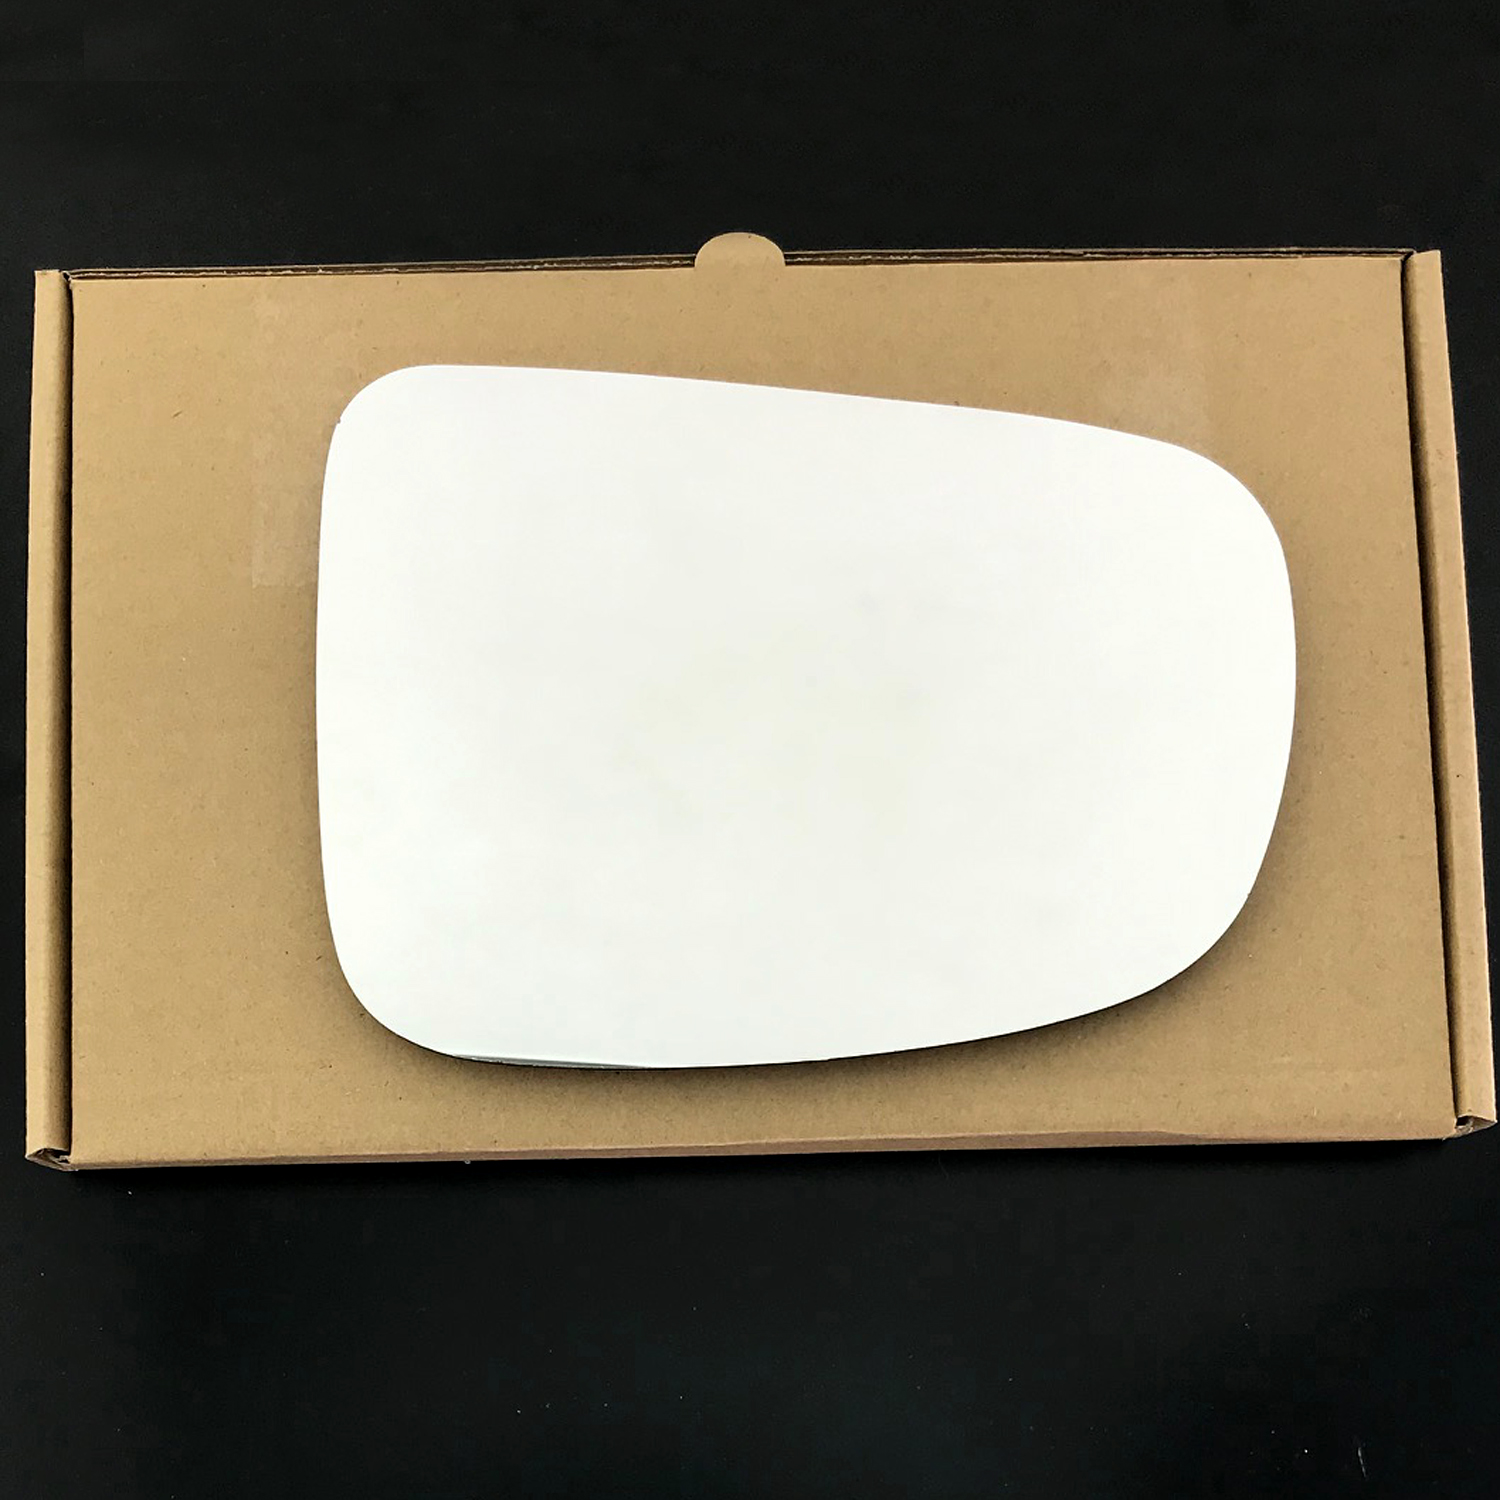 Ford Transit Wing Mirror Glass RIGHT HAND ( UK Driver Side ) 1994 to 1999 – Convex Wing Mirror ( Electric mirror )